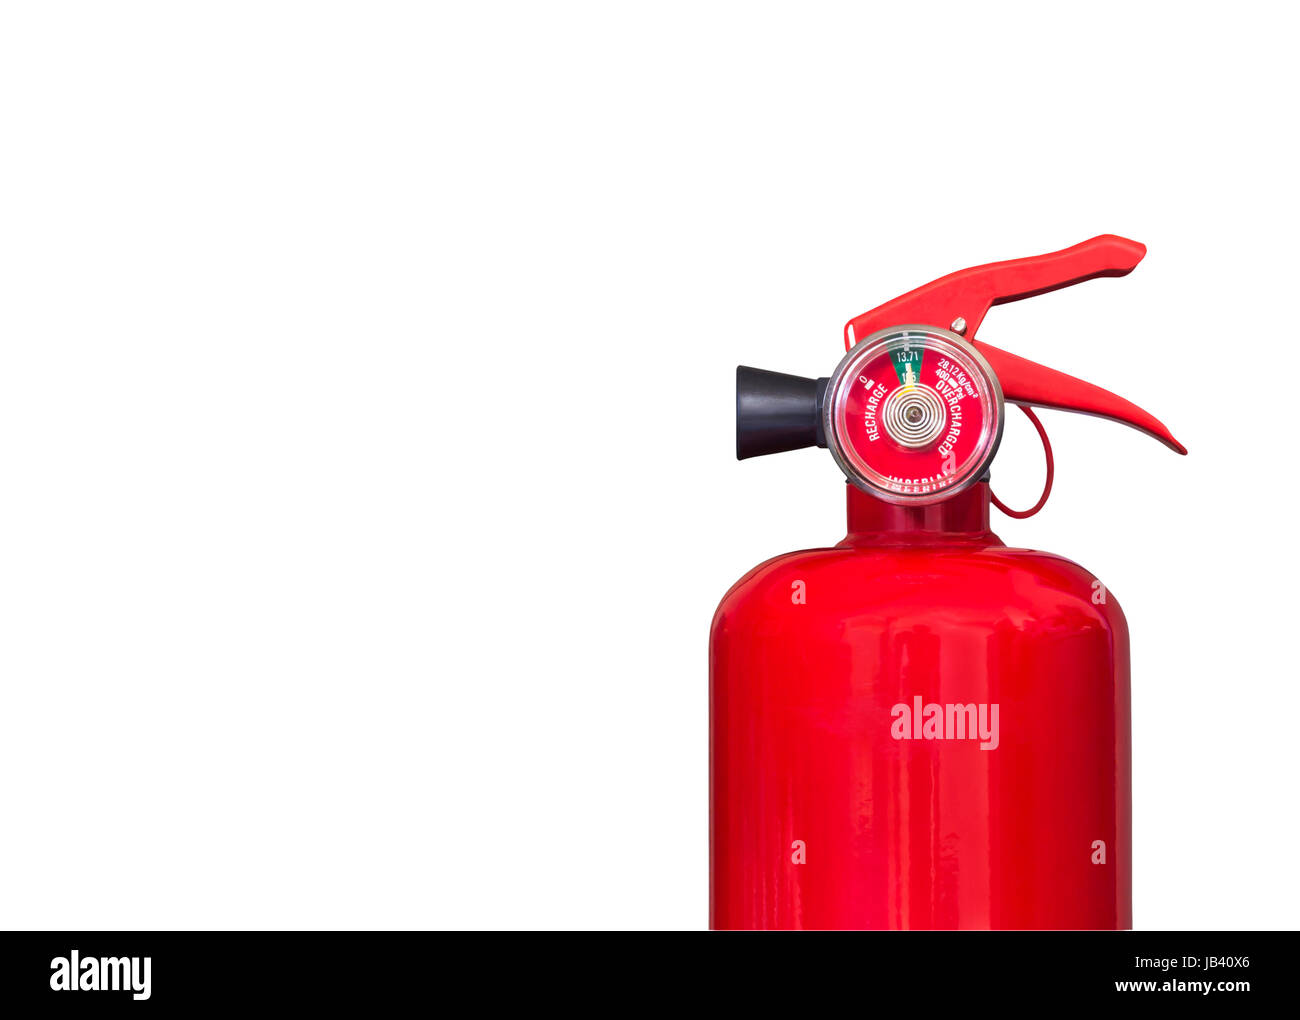 Fire extinguisher isolted on white background with clipping path Stock Photo